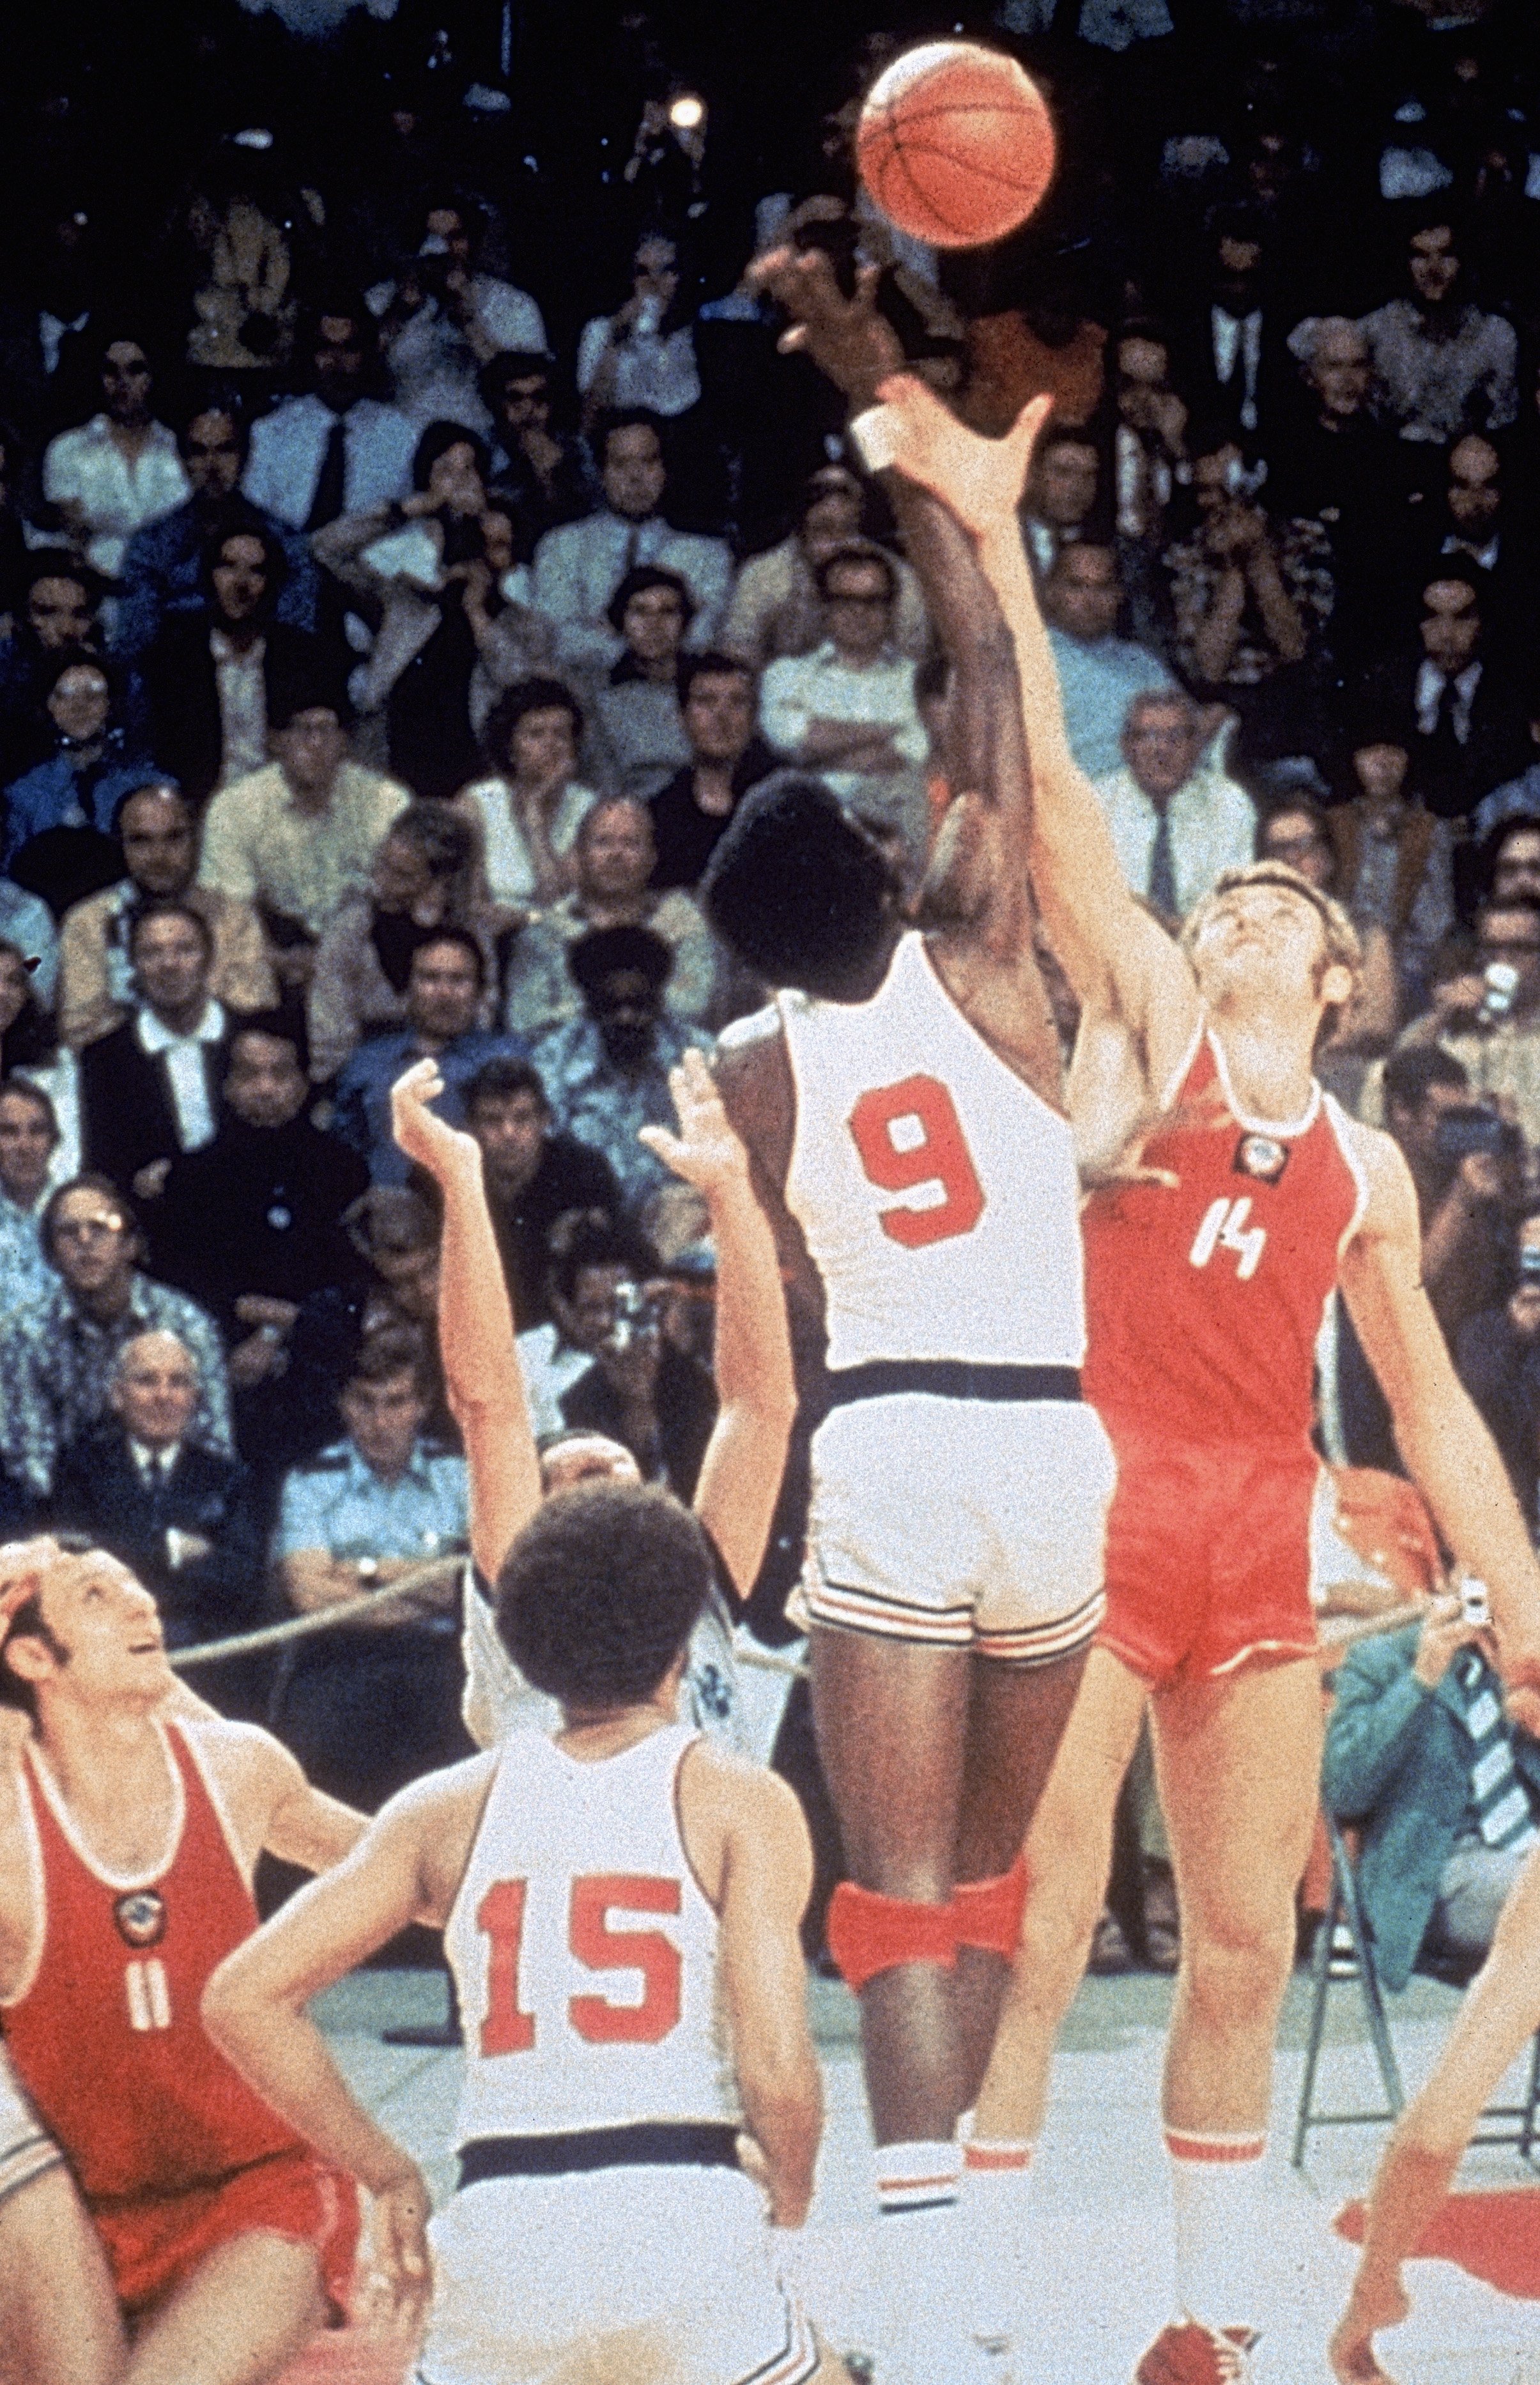 MUNICH, GERMANY - SEPTEMBER 10:  USA Basketball team battles for the tip off against the Russia basketball team on September 10, 1972 in Munich, Germany. The Russia won this controversial game 51 to 50 after being given extra time to get a final shot off.